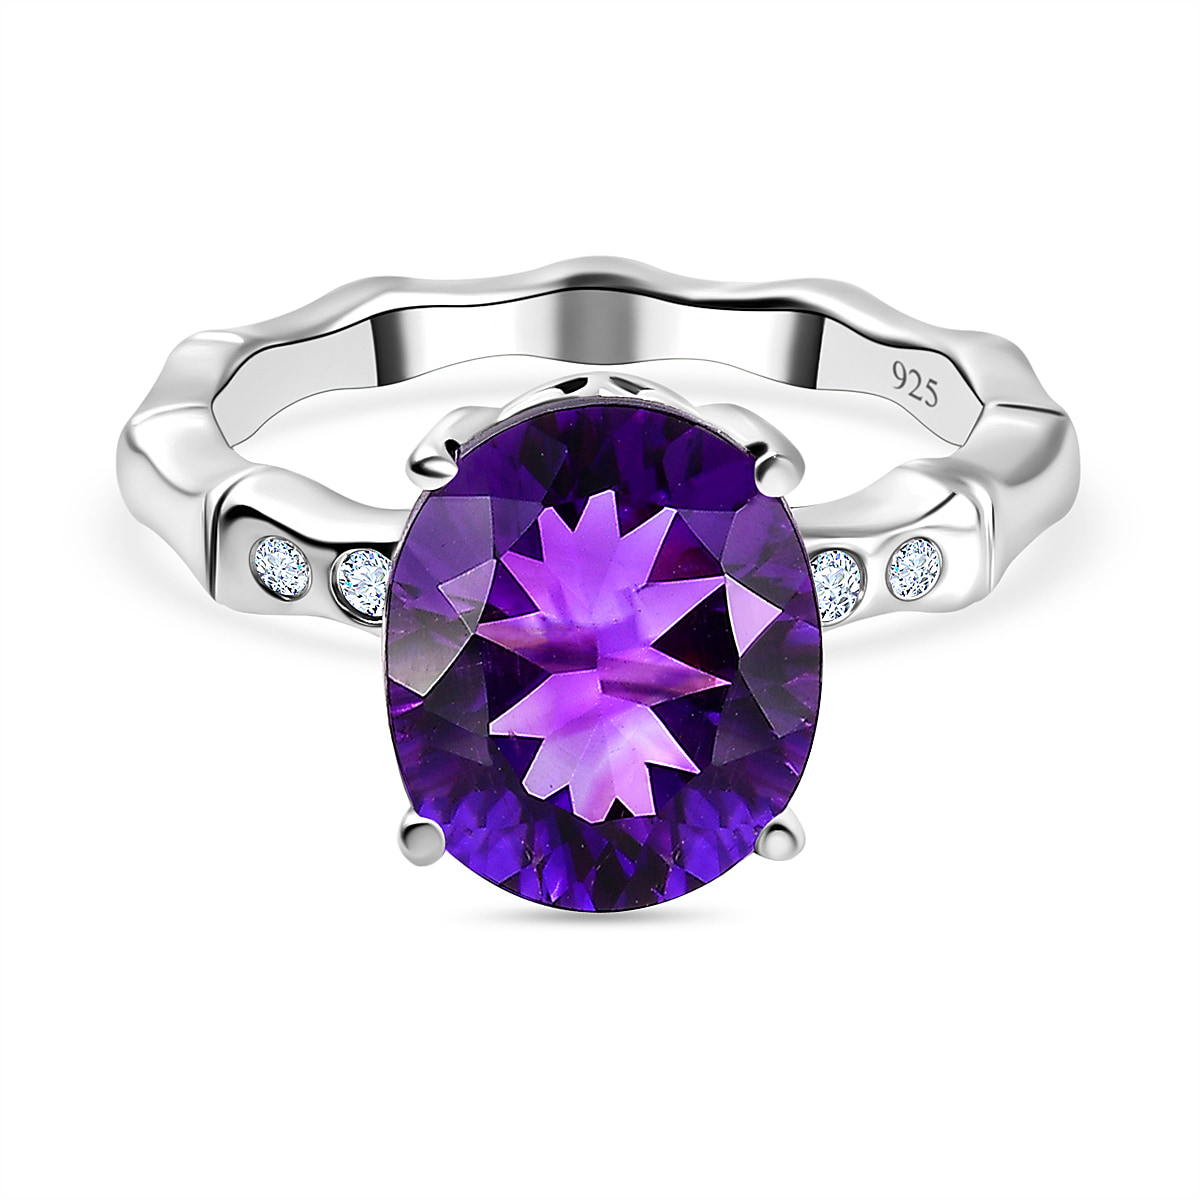 Moroccan Amethyst & Moissanite Ring in Platinum Overlay Sterling Silver 3.47 Ct.